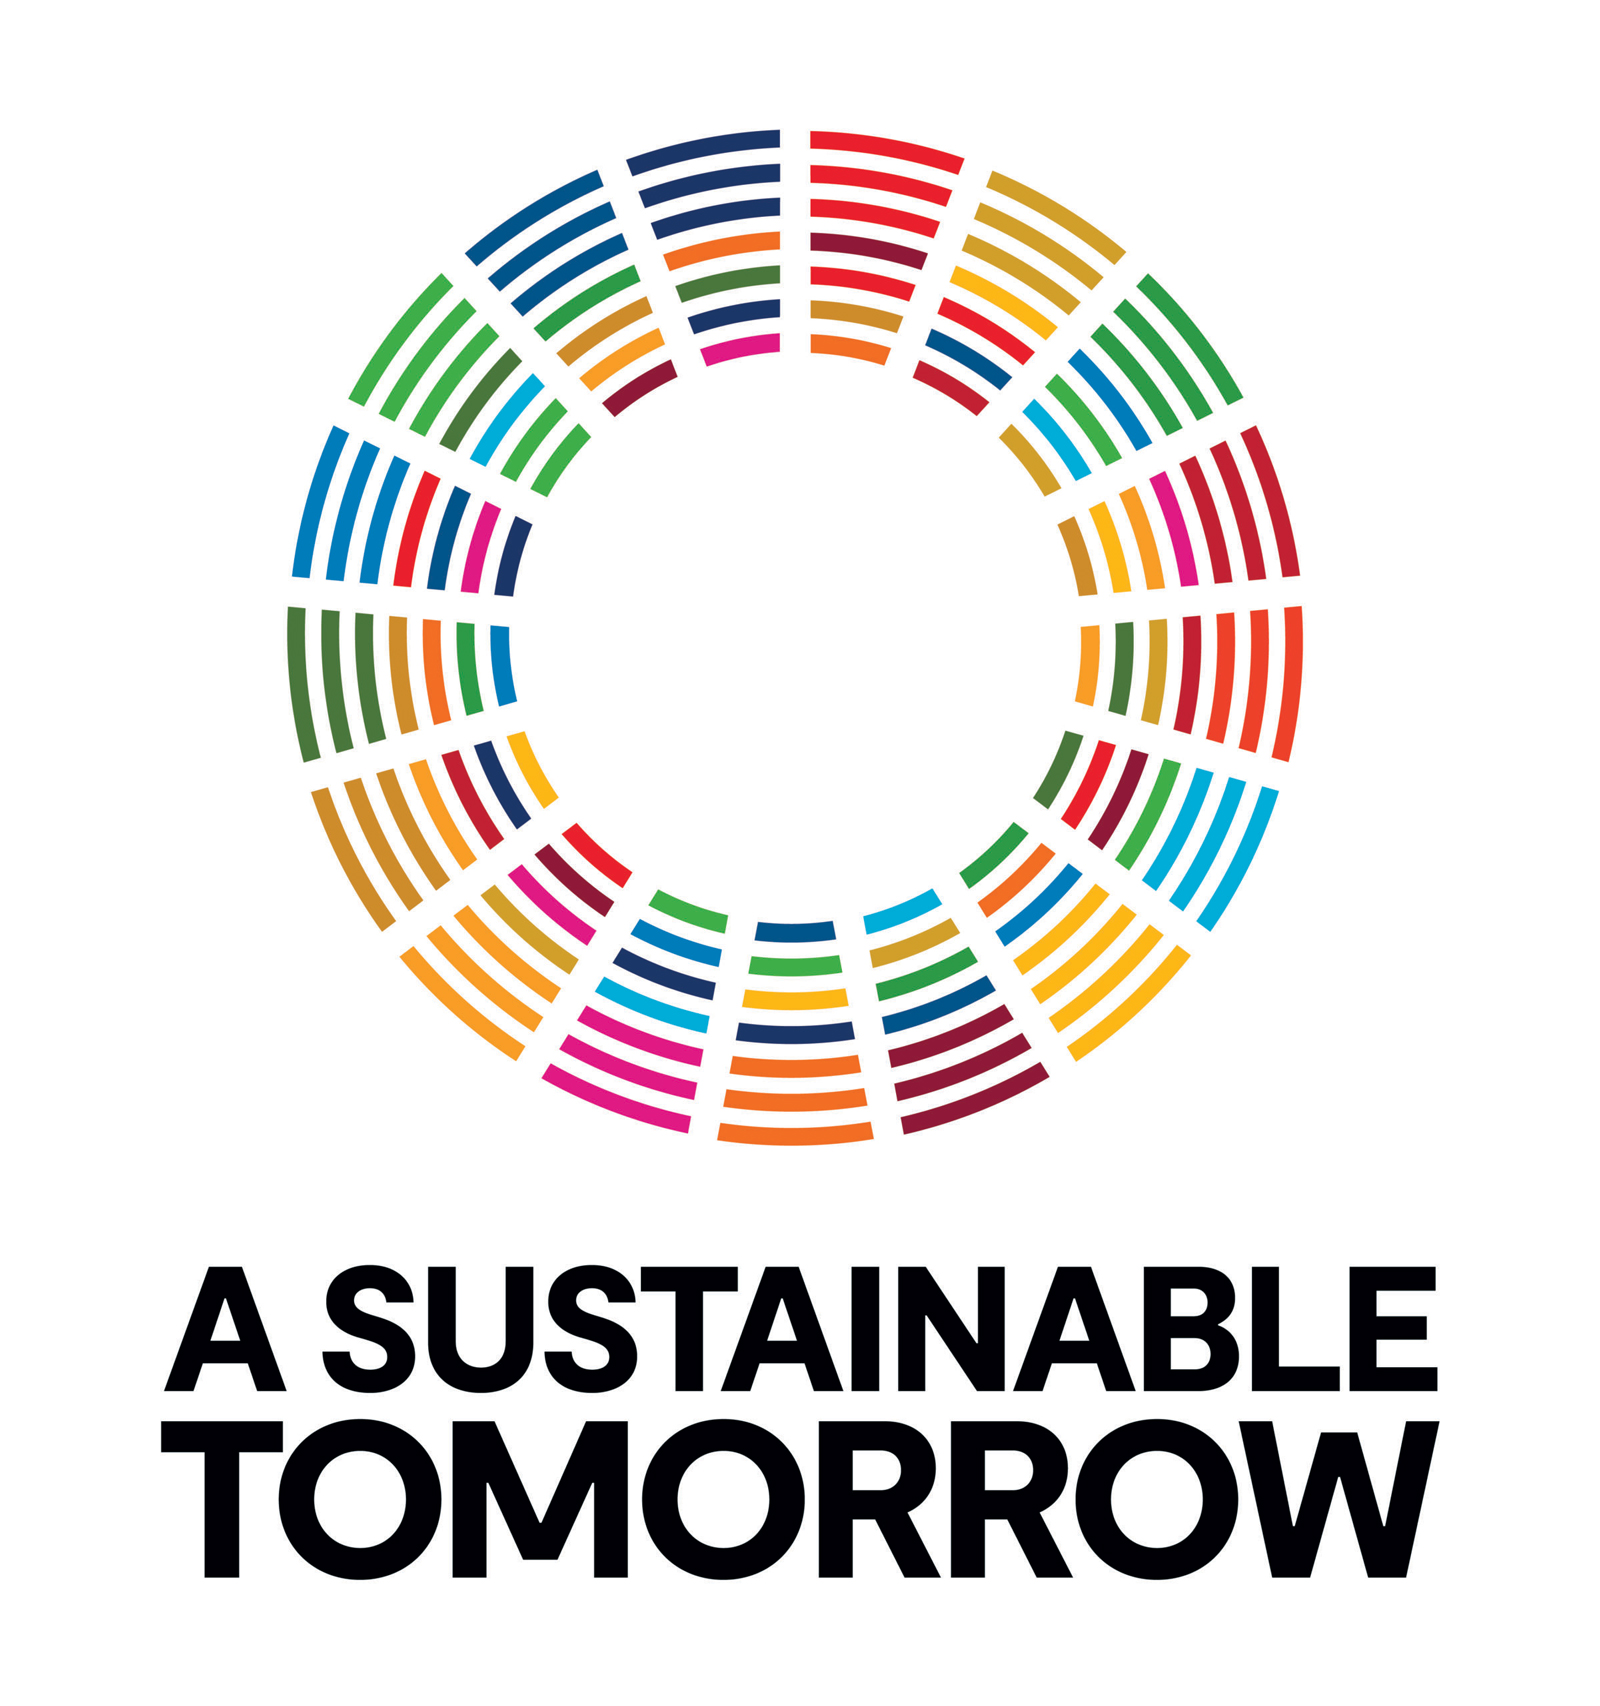 A Sustainable Tomorrow